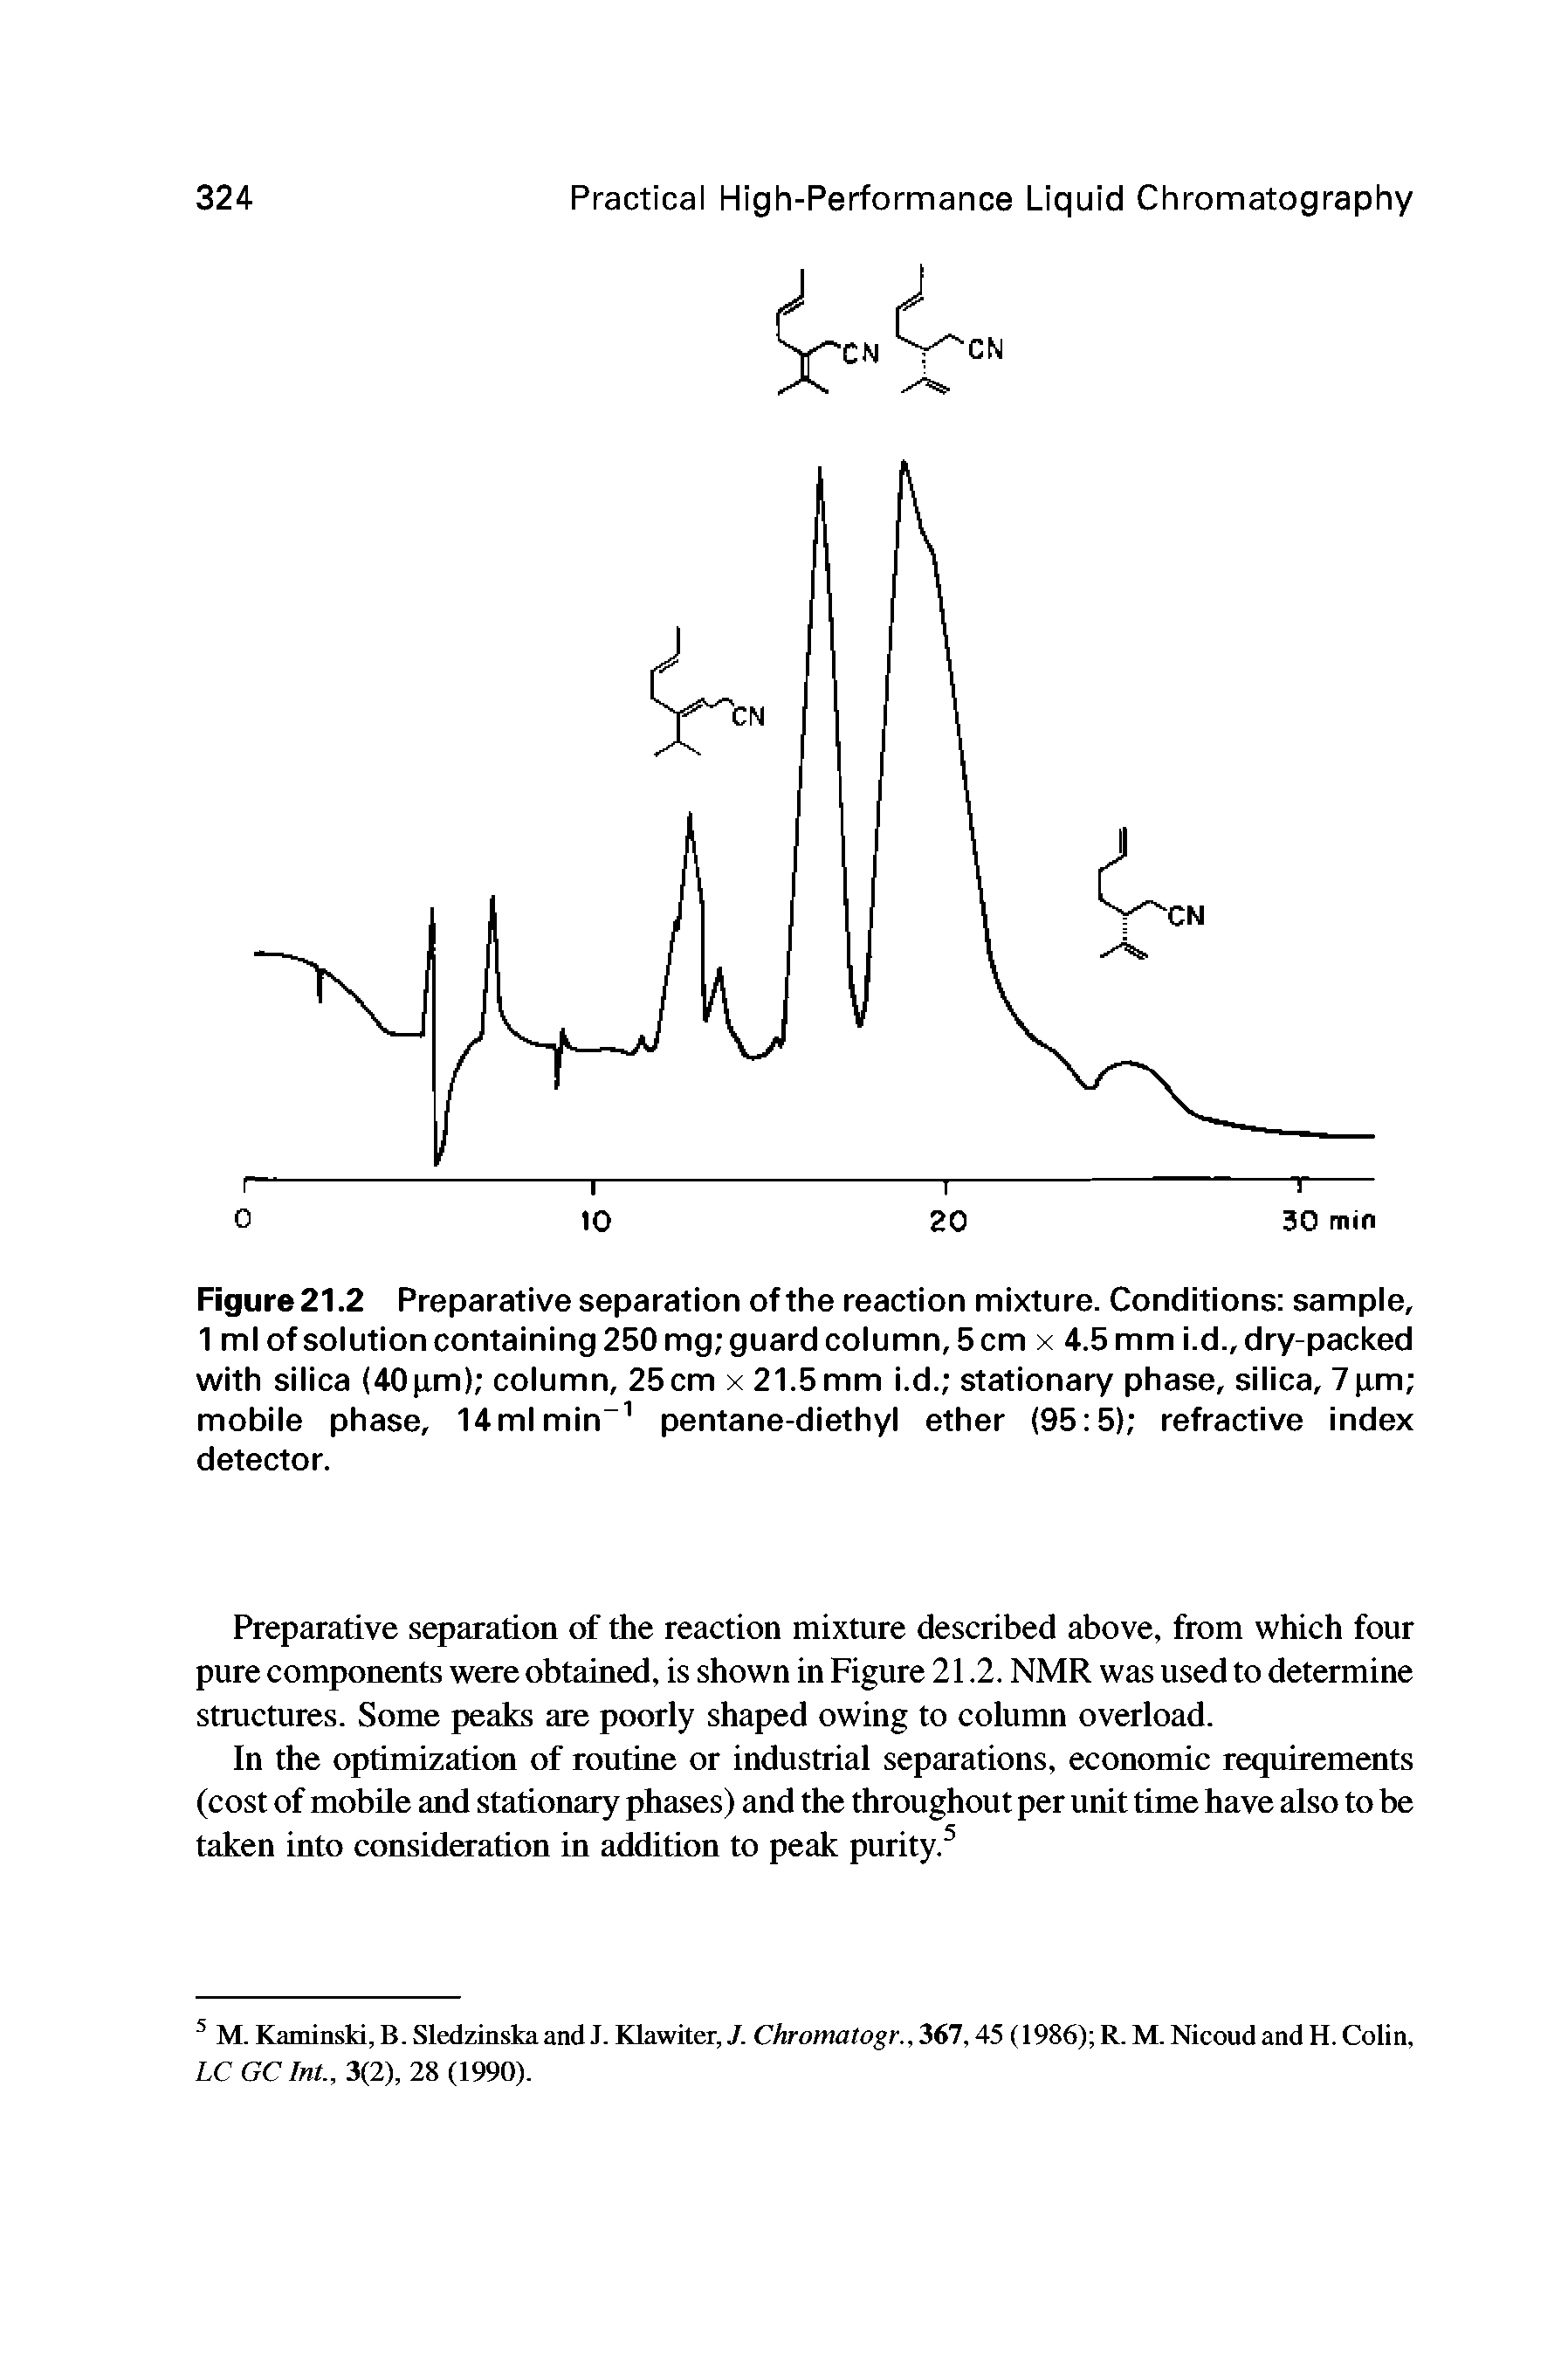 Figure21.2 Preparative separation ofthe reaction mixture. Conditions sample, 1 ml of solution containing 250 mg guard column, 5 cm x 4.5 mm i.d., dry-packed with silica (40gm) column, 25cm x 21.5mm i.d. stationary phase, silica, 7 xm ...